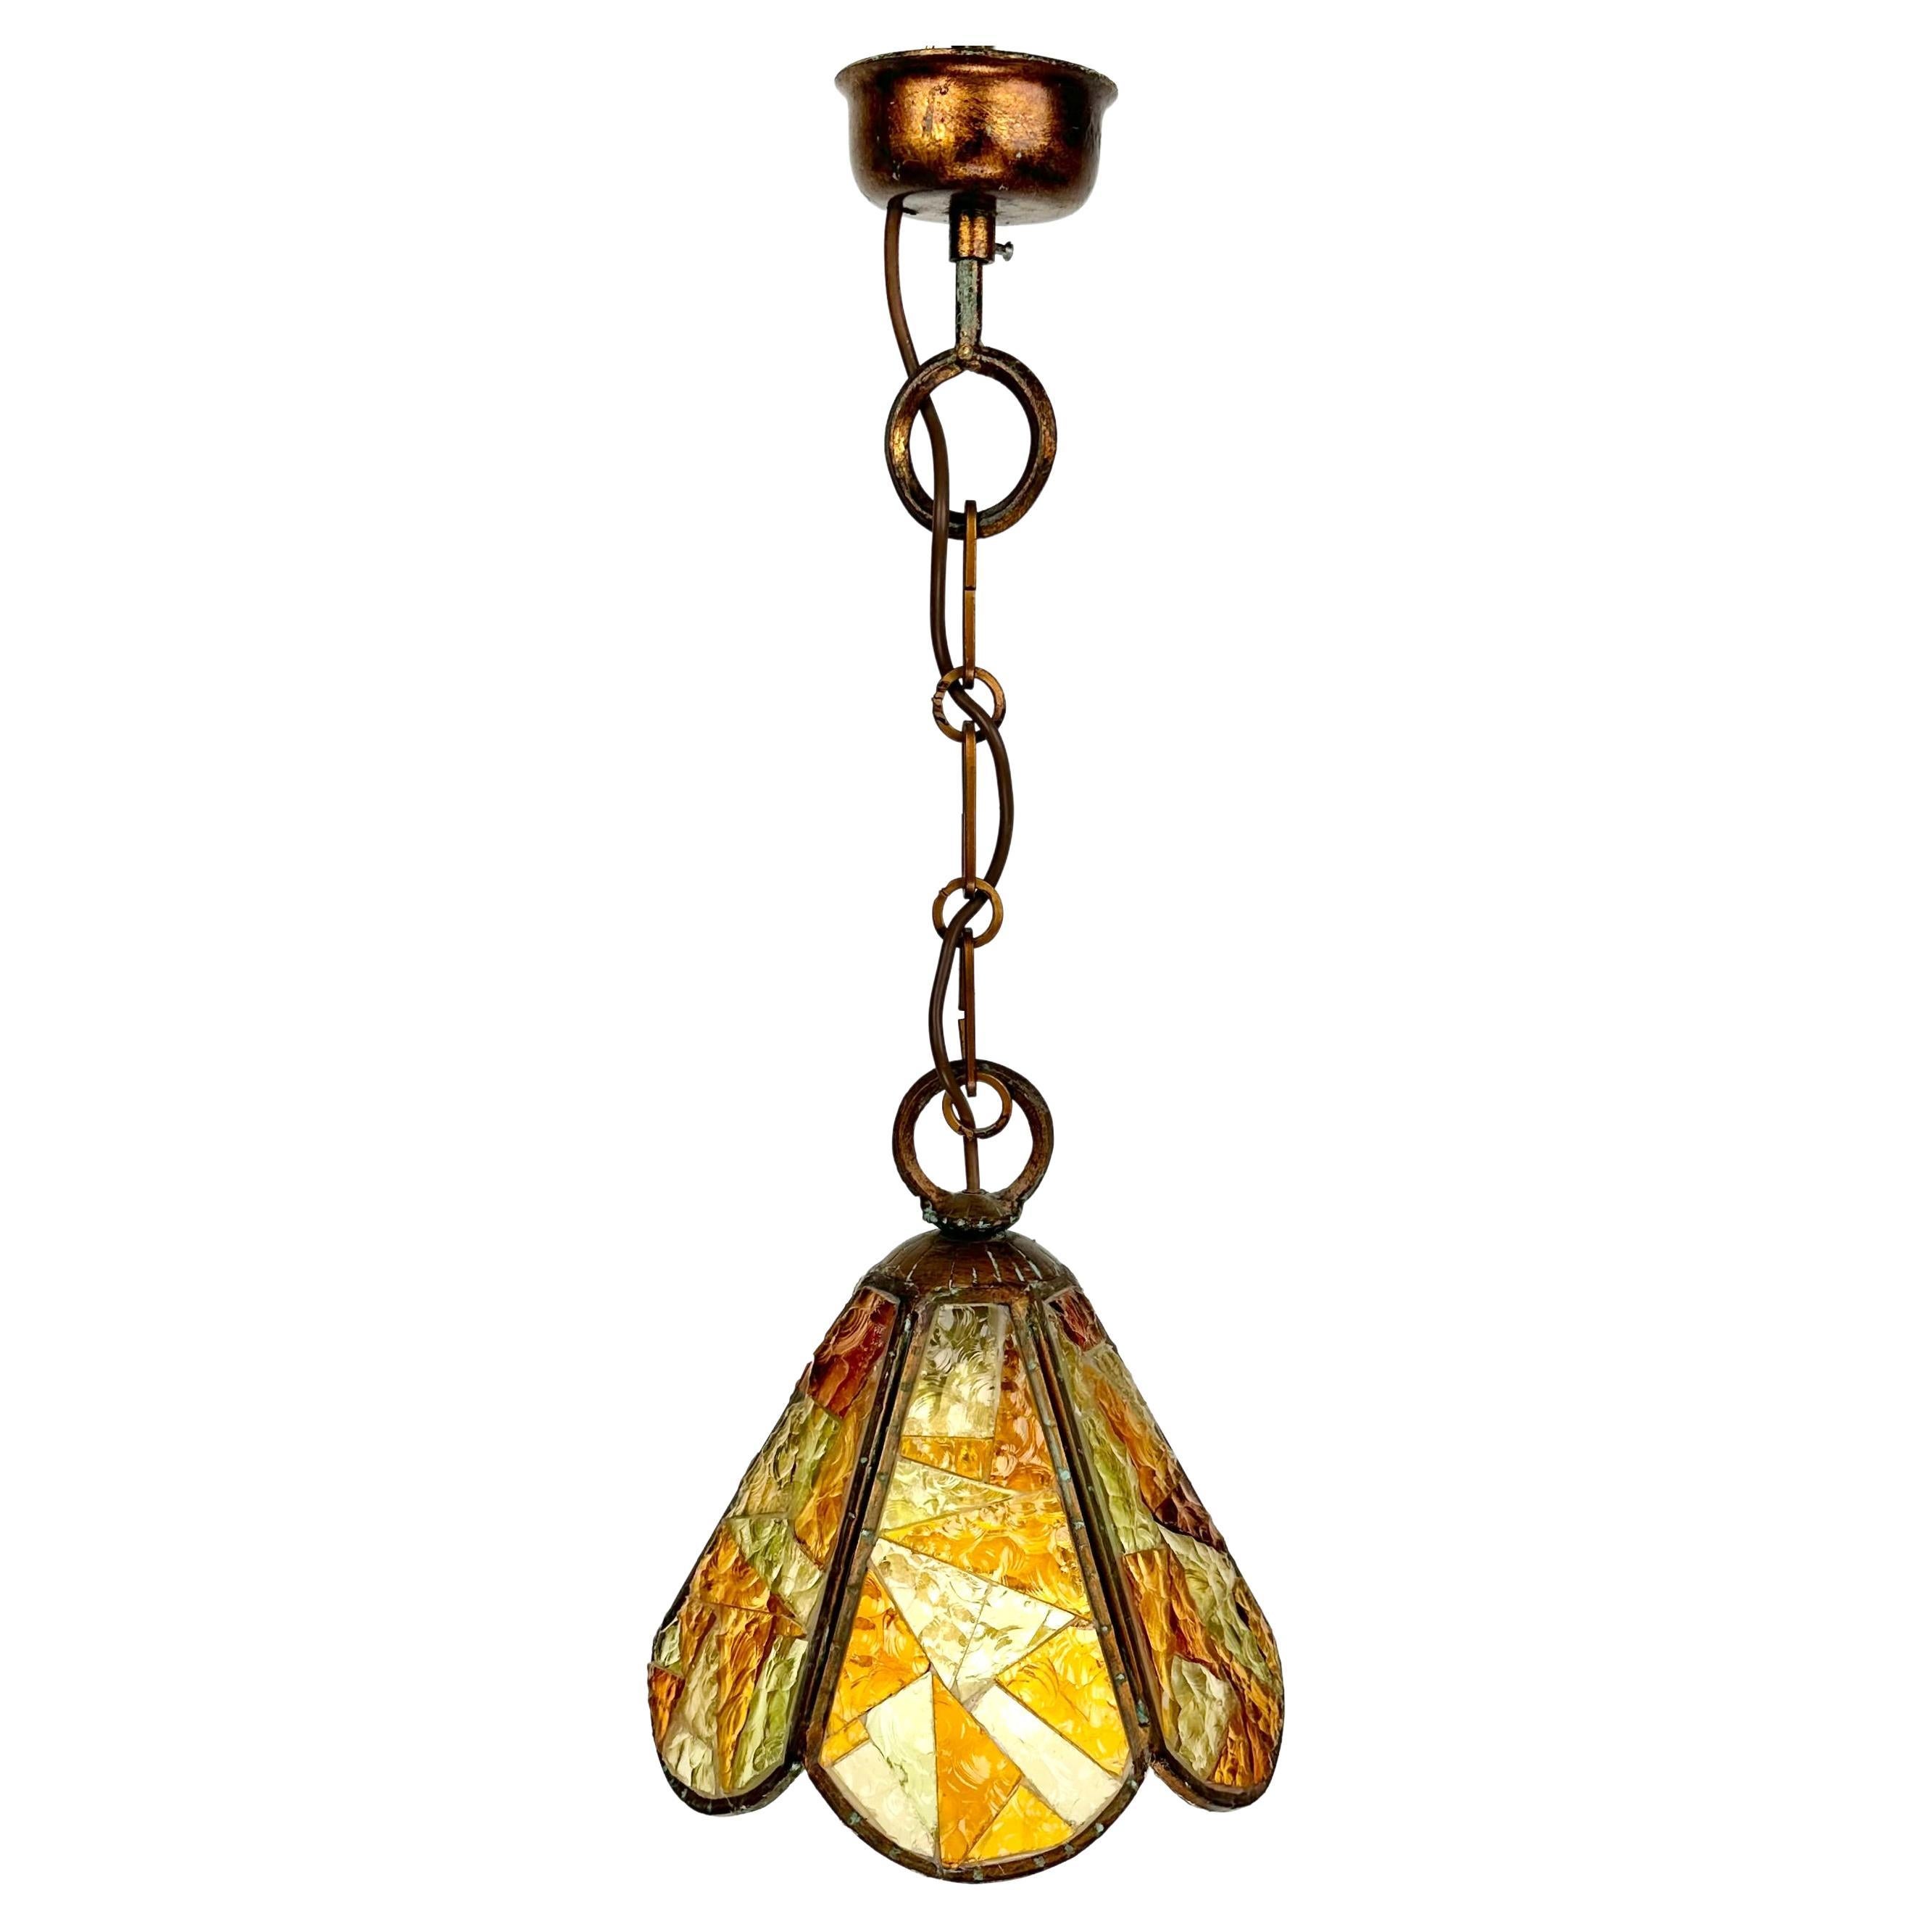 Beautiful chandelier in wrought iron and multicolor art glass produced by Longobard.

Made in Italy in the 1970s.